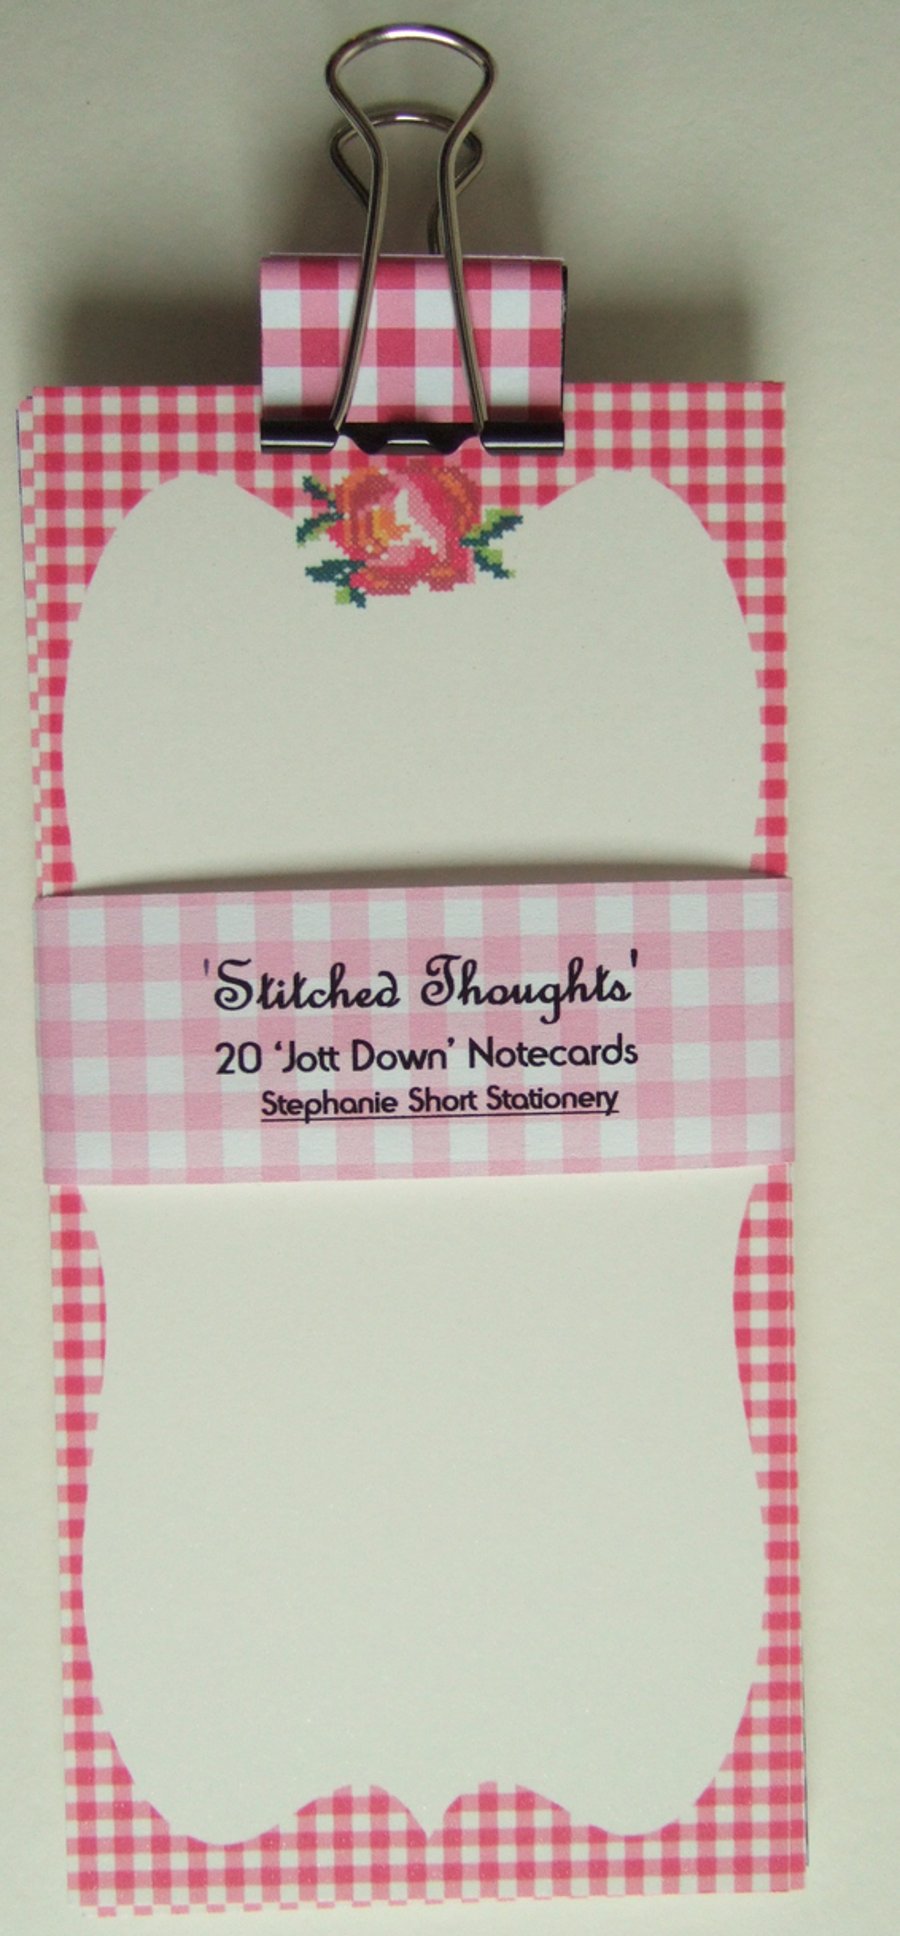 'Stitched Thoughts' Set of 20 ' Jott Down' Notecards,Handmade Notecards